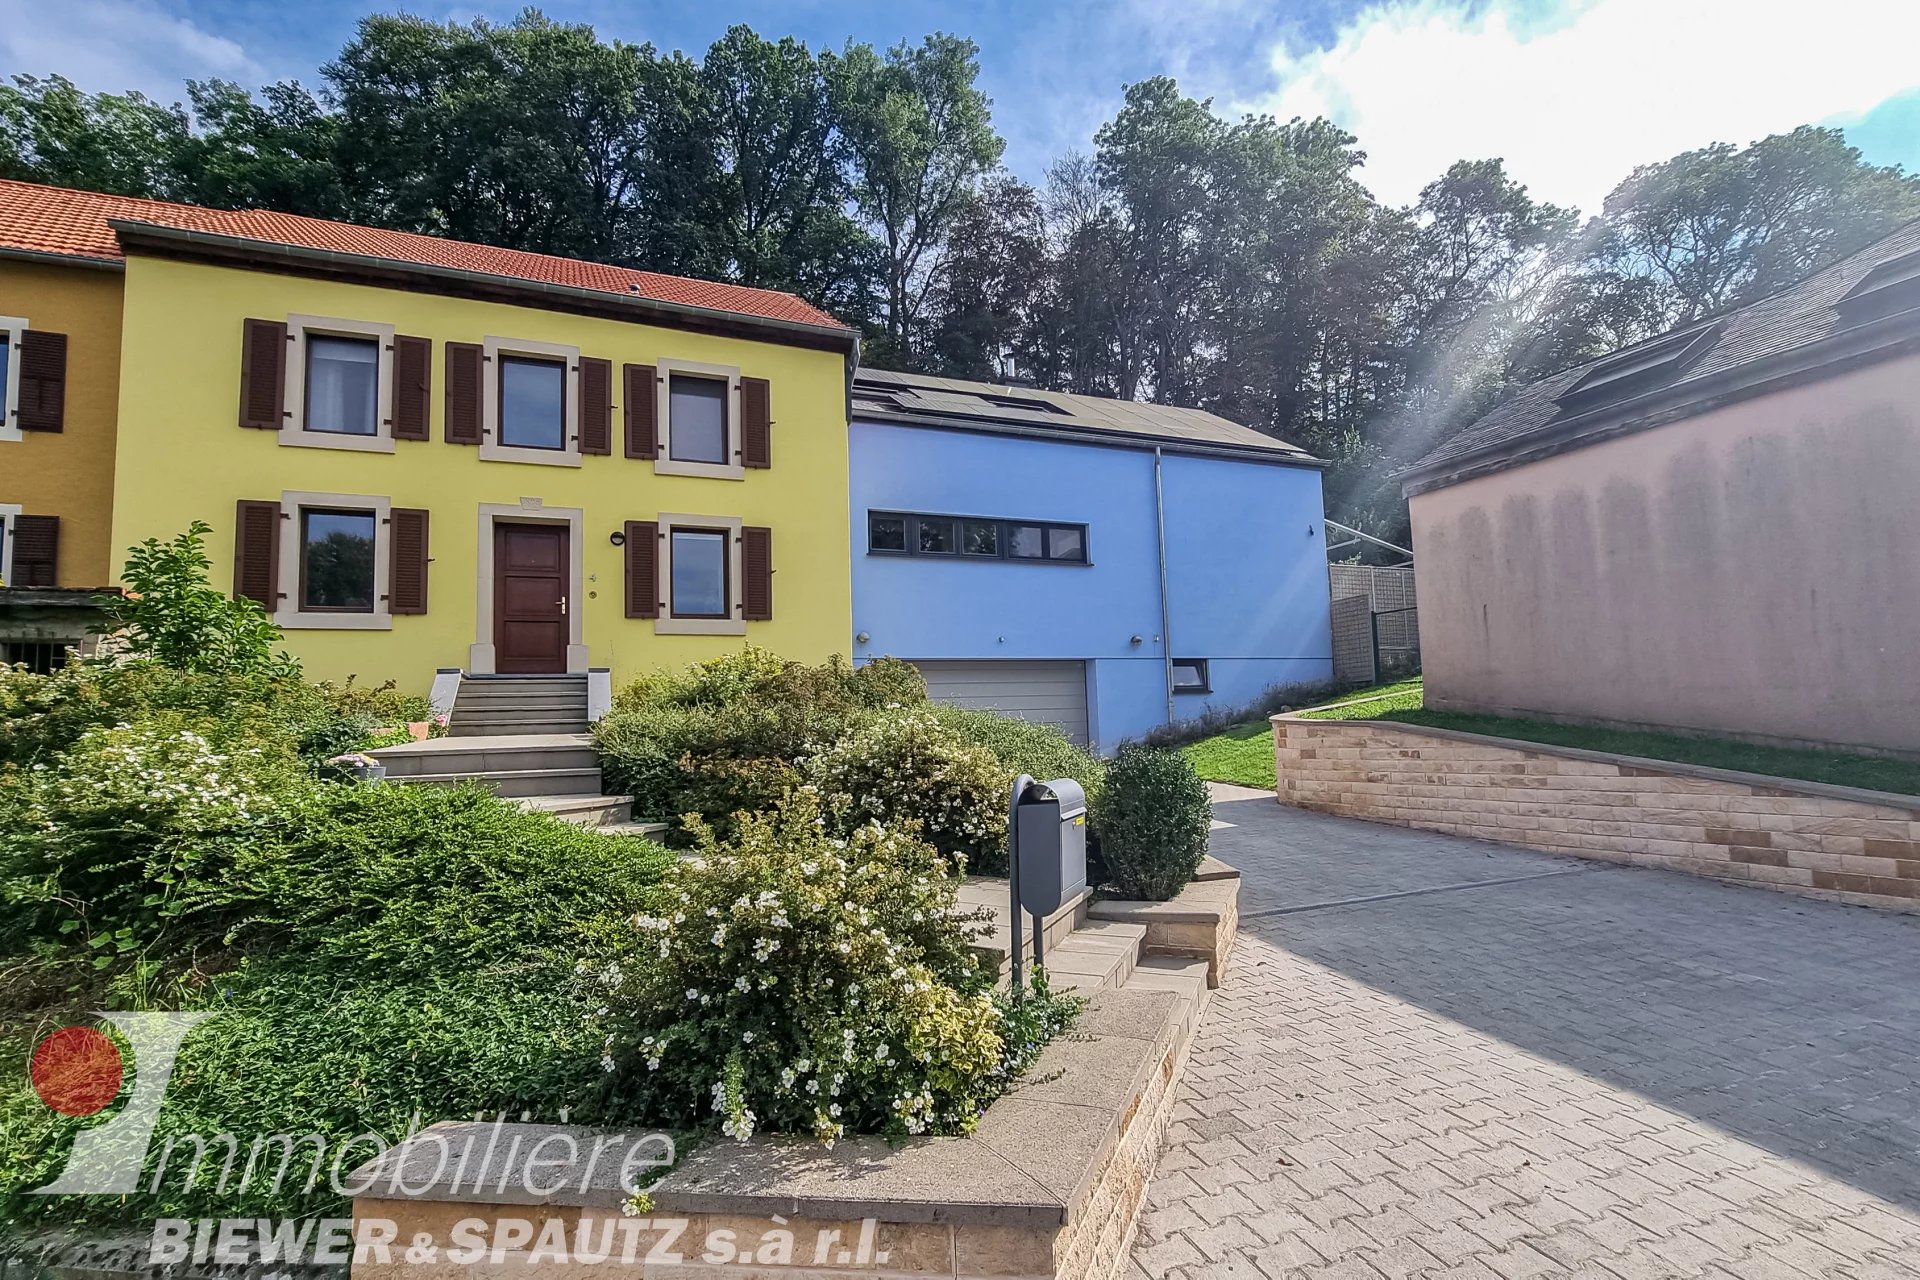 FOR SALE - Semi-detached house with 5 bedrooms in Ernste